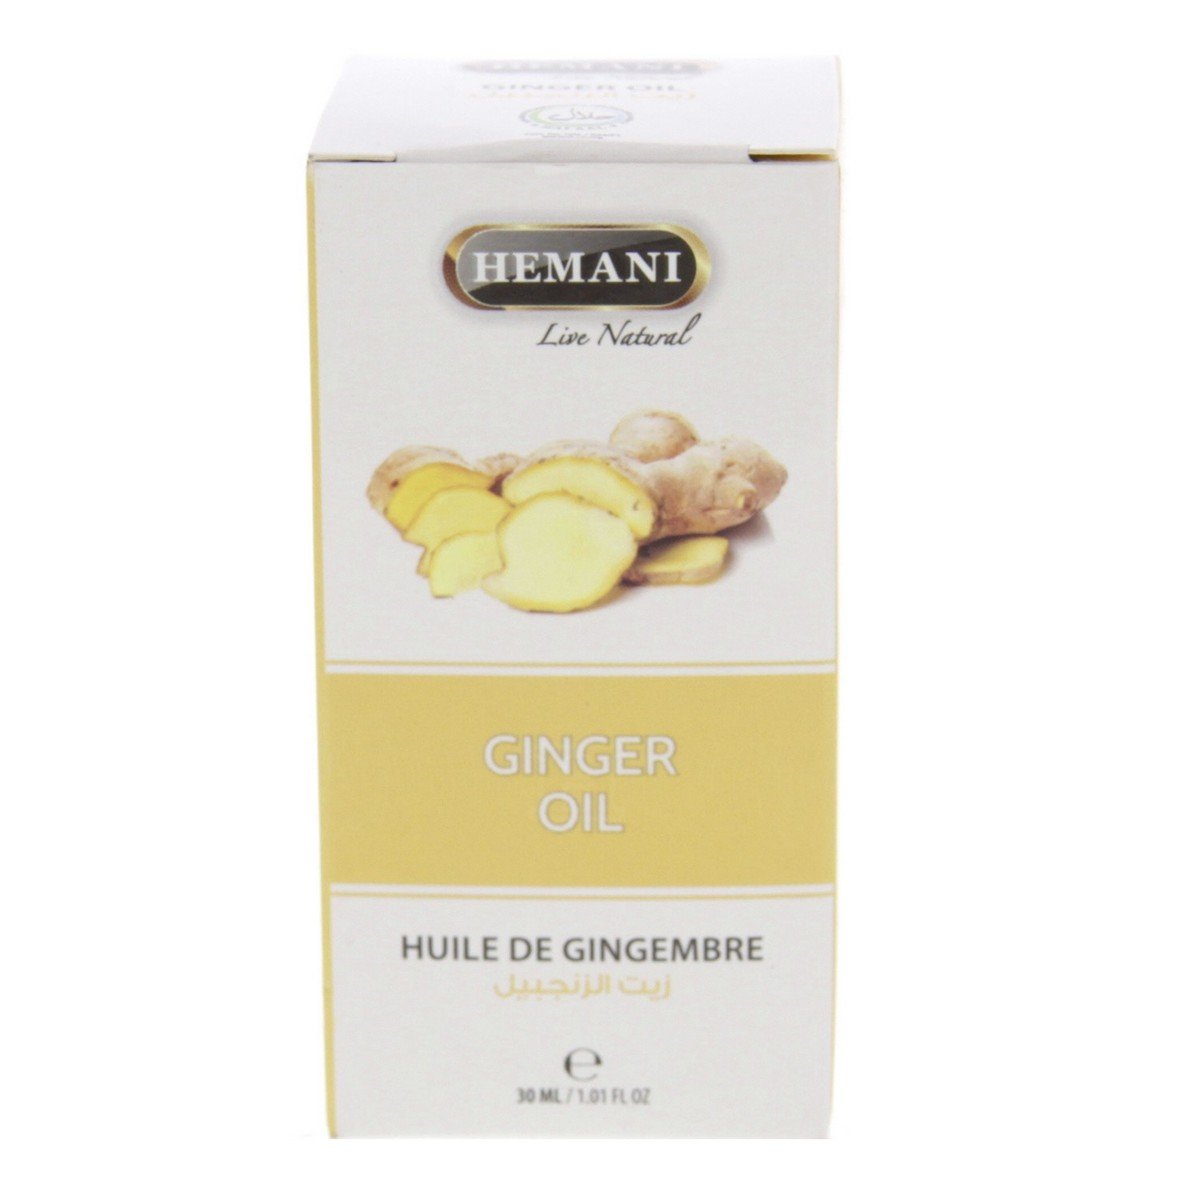 Buy Now Essential Oils Ginger Oil For Aromatherapy 30ml Online at Best  Price in UAE